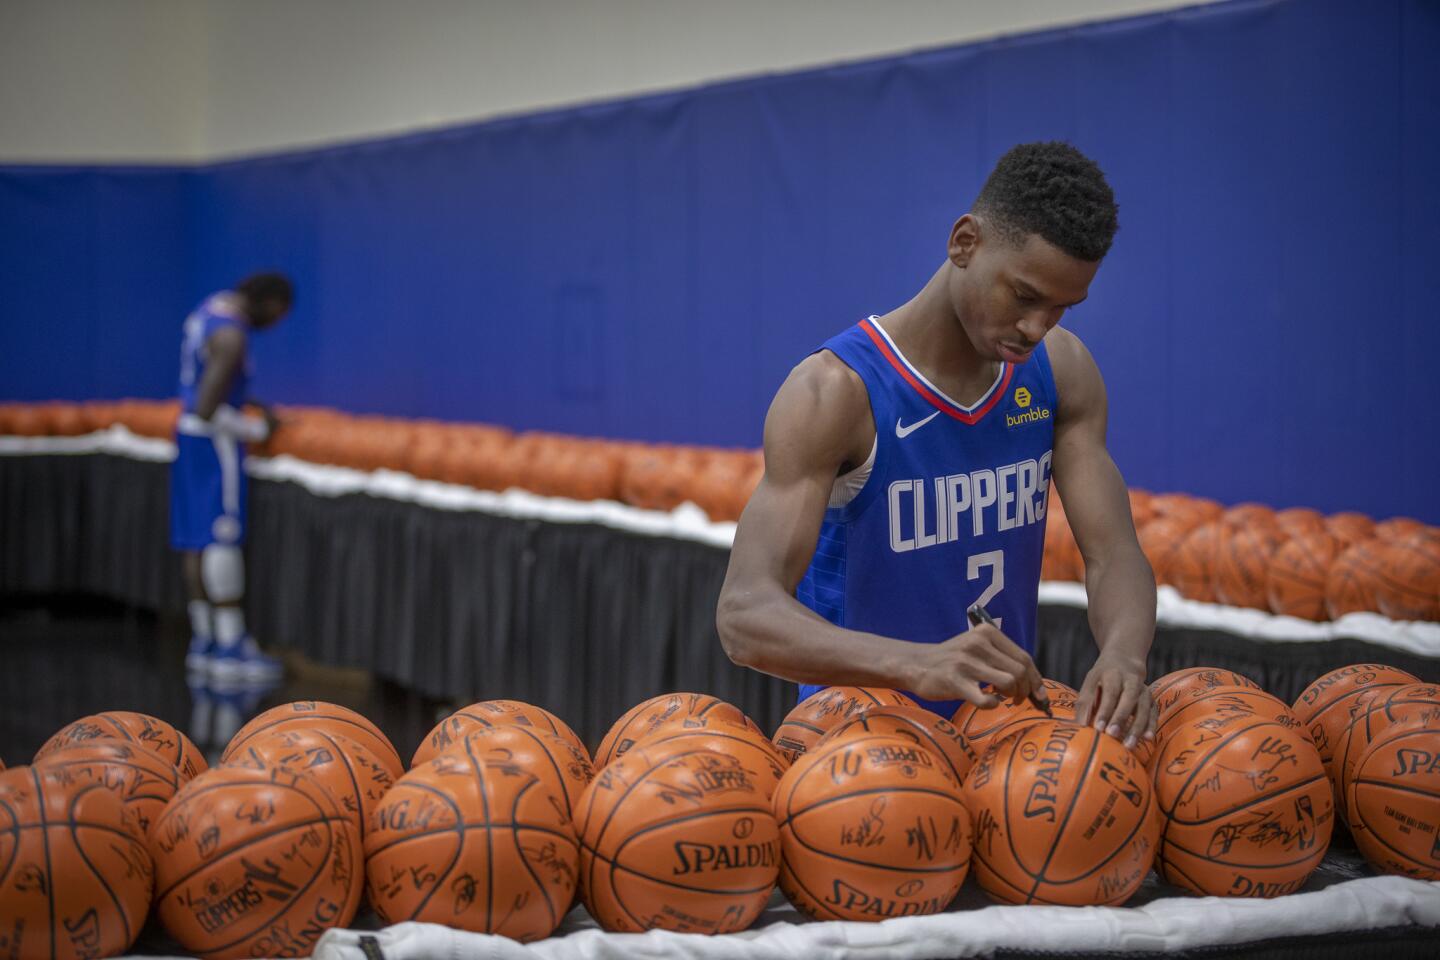 Clippers rookie guard Shai Gilgeous-Alexander (2) and teammate Montrezl Harrell sign basketball during media day in Playa Vista.